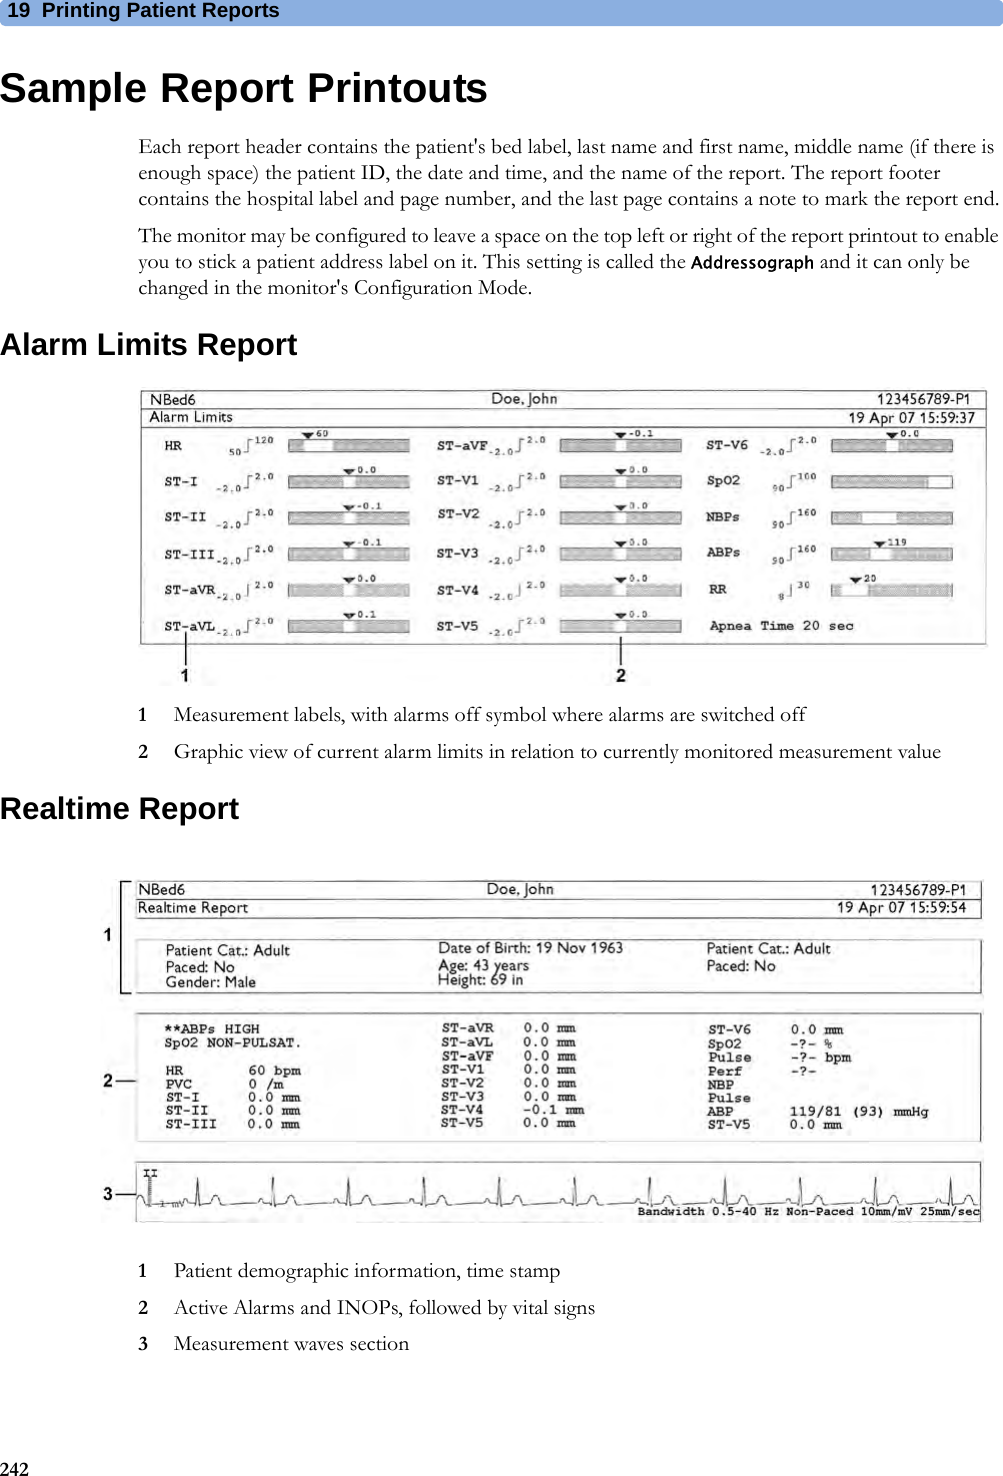 19 Printing Patient Reports242Sample Report PrintoutsEach report header contains the patient&apos;s bed label, last name and first name, middle name (if there is enough space) the patient ID, the date and time, and the name of the report. The report footer contains the hospital label and page number, and the last page contains a note to mark the report end.The monitor may be configured to leave a space on the top left or right of the report printout to enable you to stick a patient address label on it. This setting is called the Addressograph and it can only be changed in the monitor&apos;s Configuration Mode.Alarm Limits Report1Measurement labels, with alarms off symbol where alarms are switched off2Graphic view of current alarm limits in relation to currently monitored measurement valueRealtime Report1Patient demographic information, time stamp2Active Alarms and INOPs, followed by vital signs3Measurement waves section